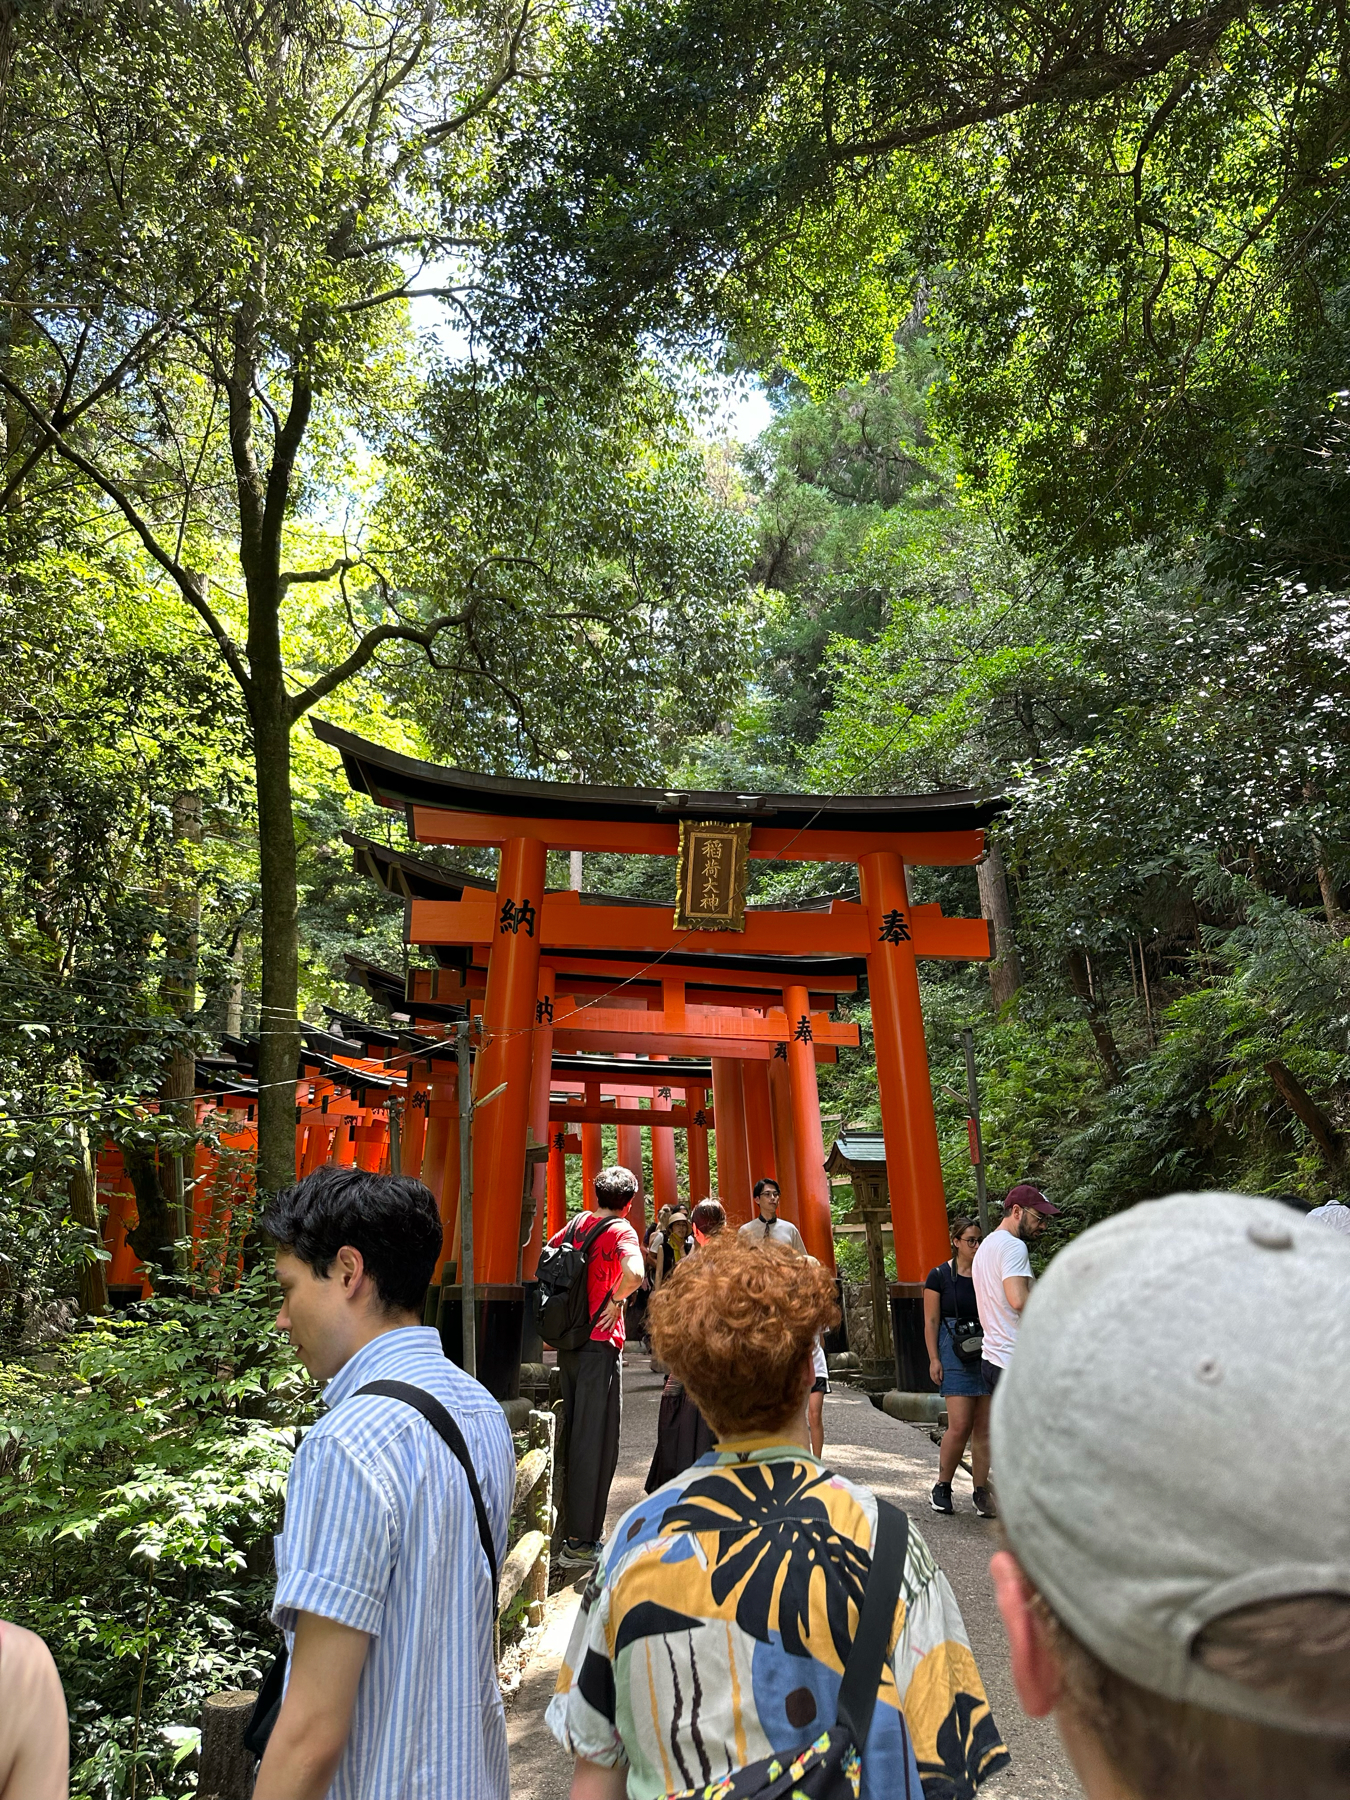 Tourists walking through a shaded path lined with vibrant orange torii gates at a Shinto shrine in Japan, surrounded by lush greenery.